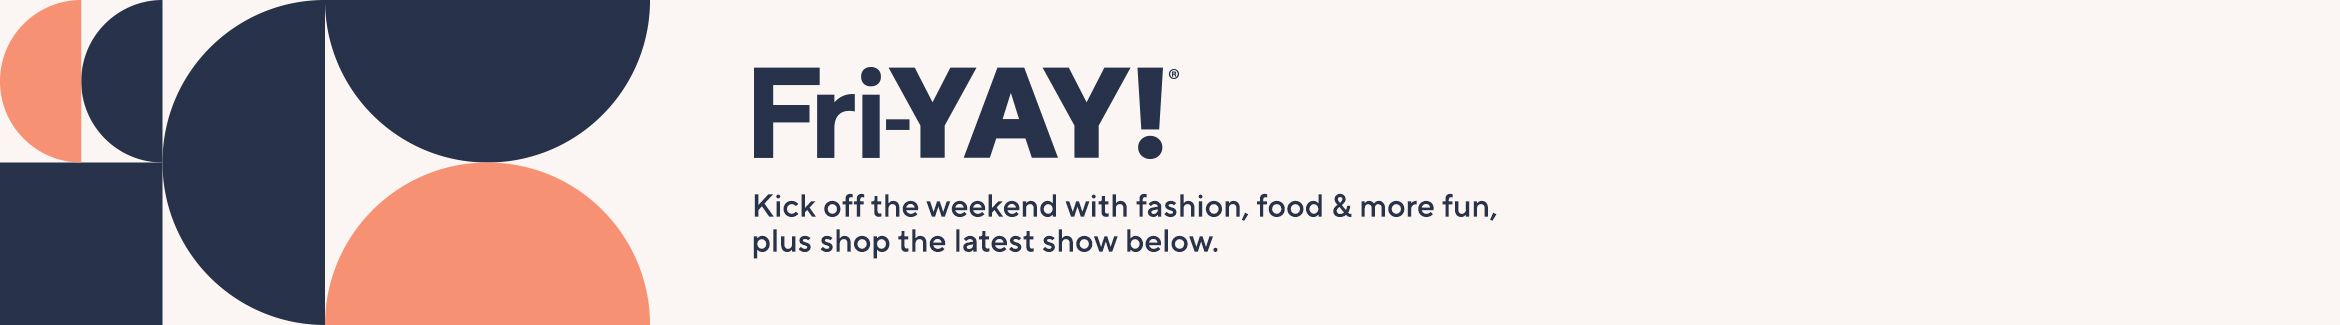 Fri-YAY: Kick off the weekend with fashion, food & more fun, plus shop the latest show below. 